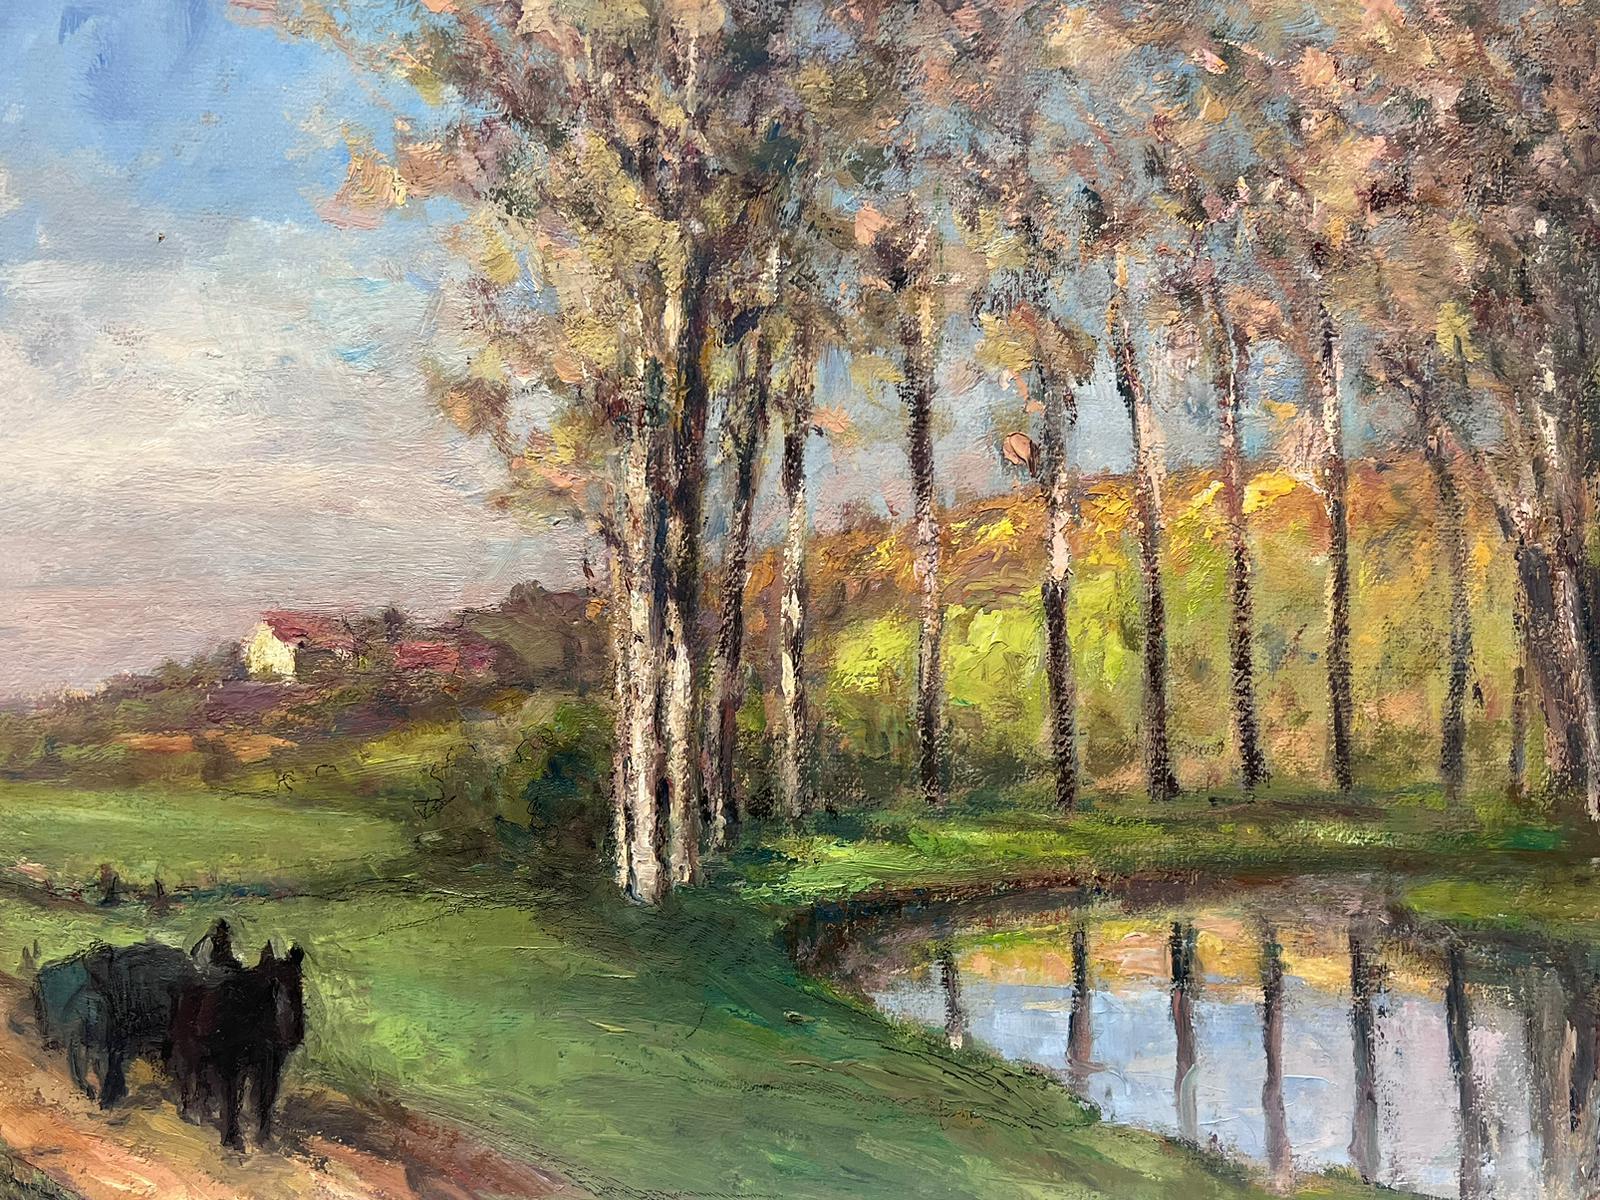 Artist/ School: Leon Hatot (French 1883-1953)

Title: Impressionist oil painting 

Medium: oil painting on thick paper, stuck on board unframed.

Size: painting: 13 x 20 inches

Provenance: all the paintings we have for sale by this artist have come